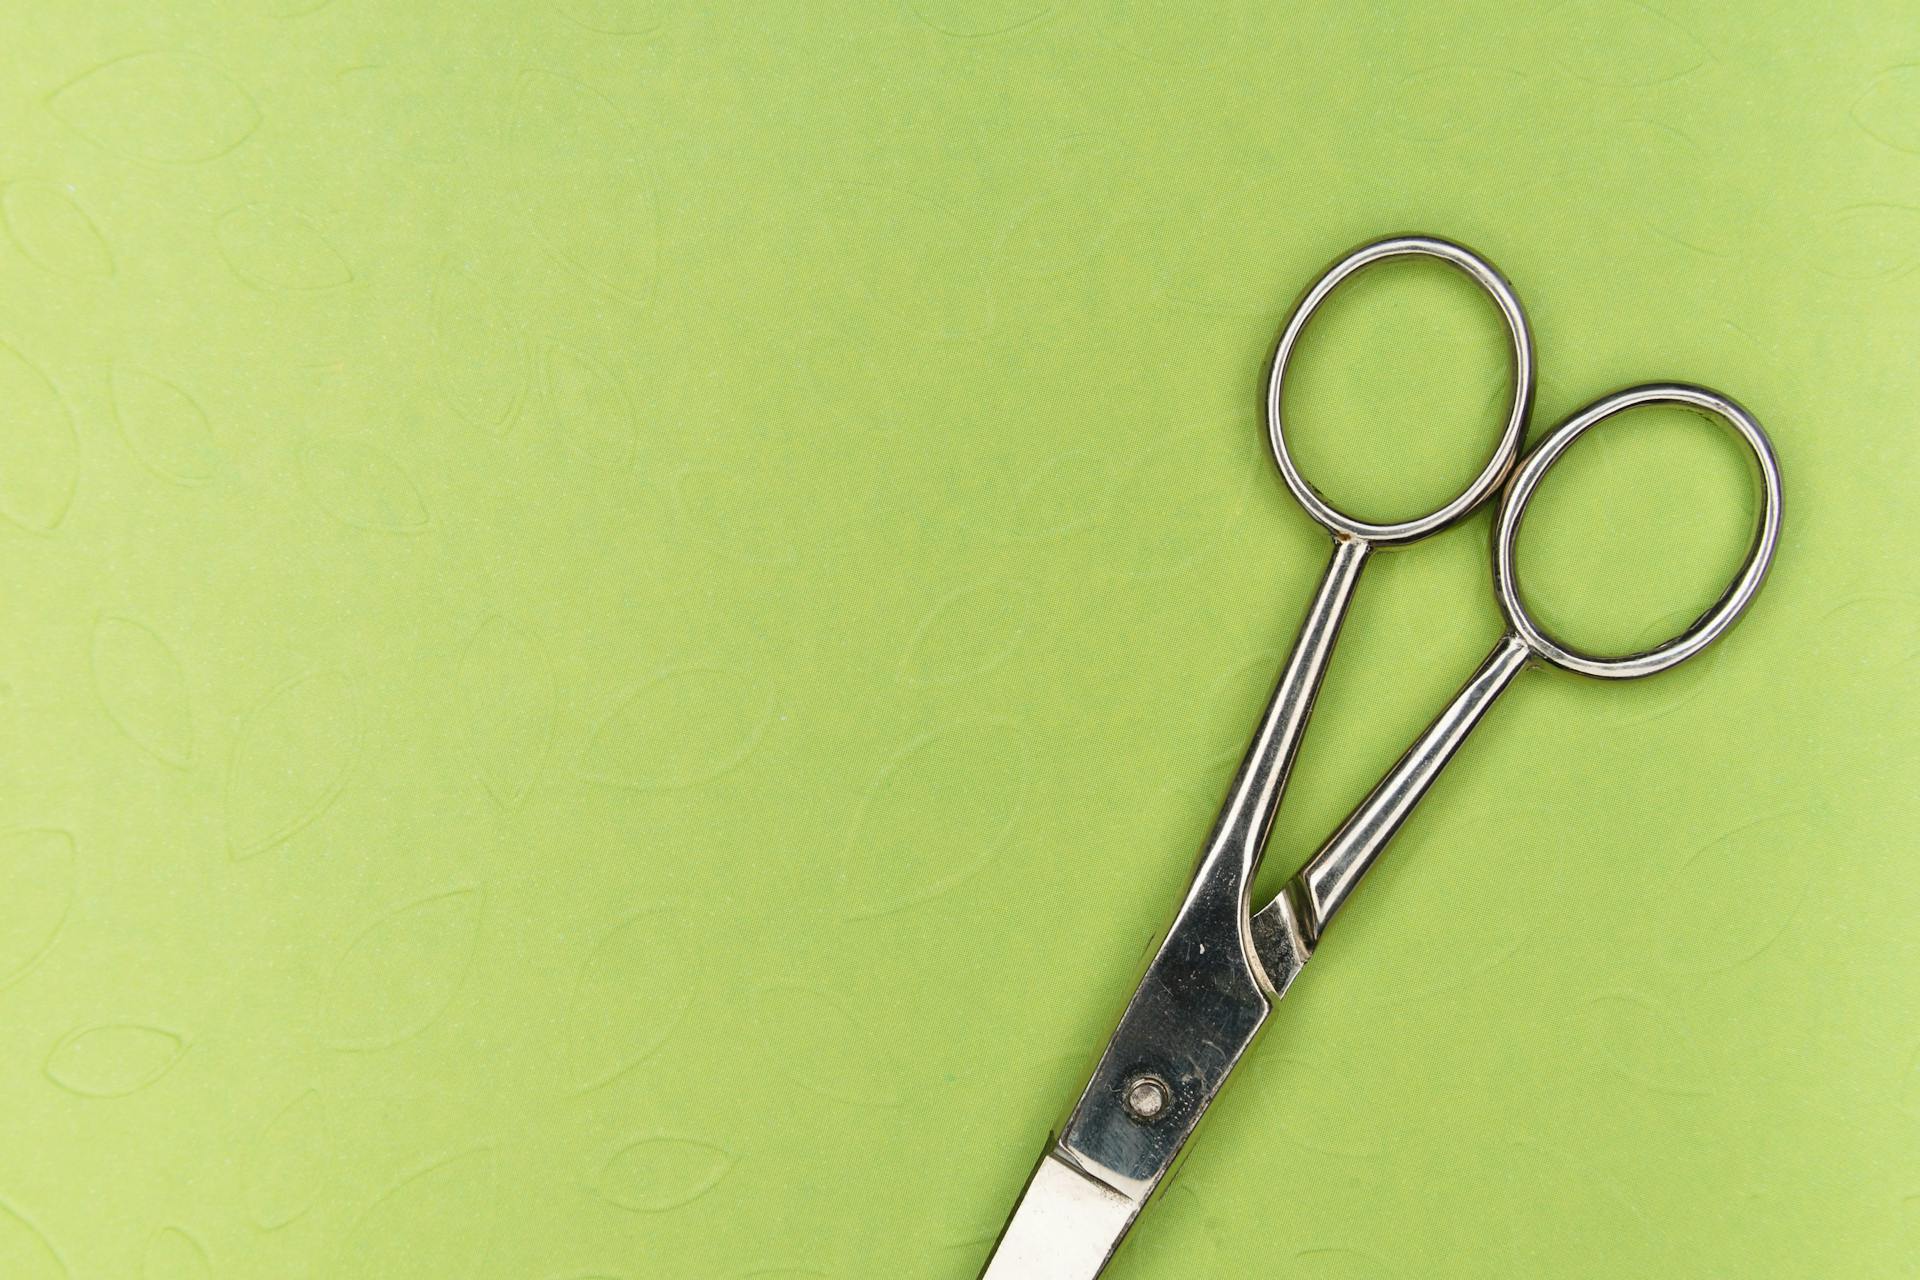 Pair of scissors on green background